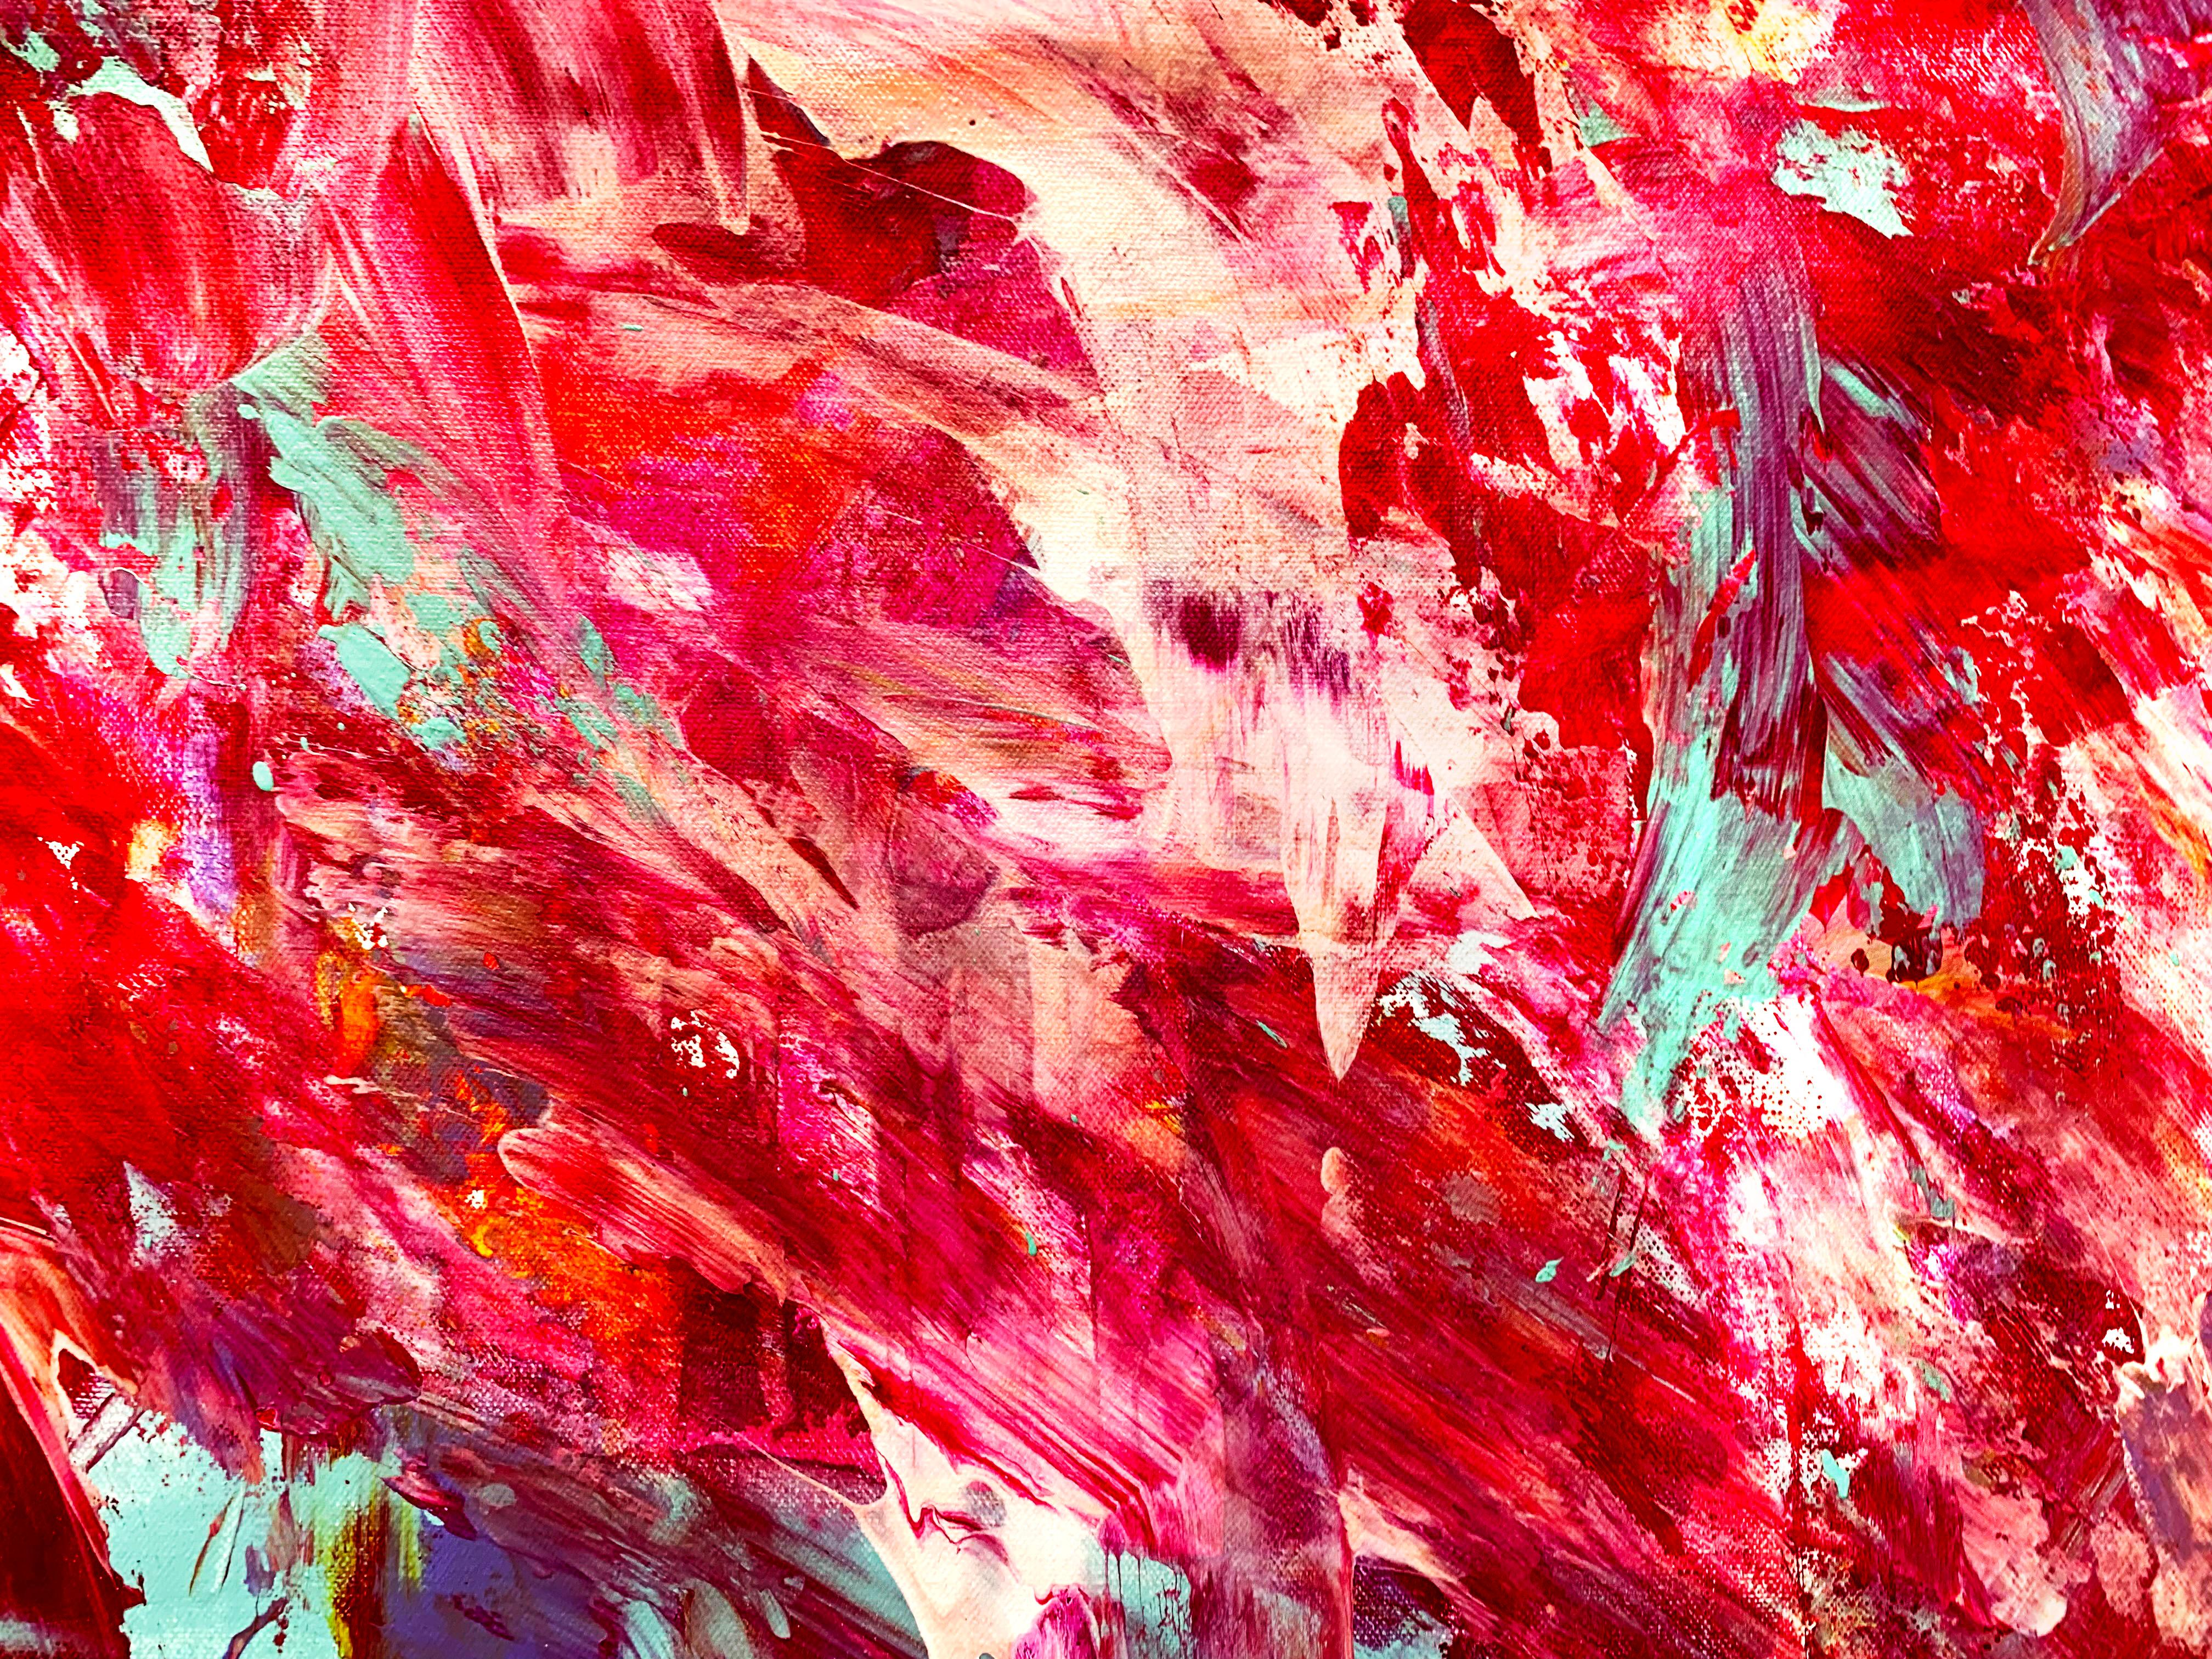 Abstract Light - Red Interior Painting by Estelle Asmodelle